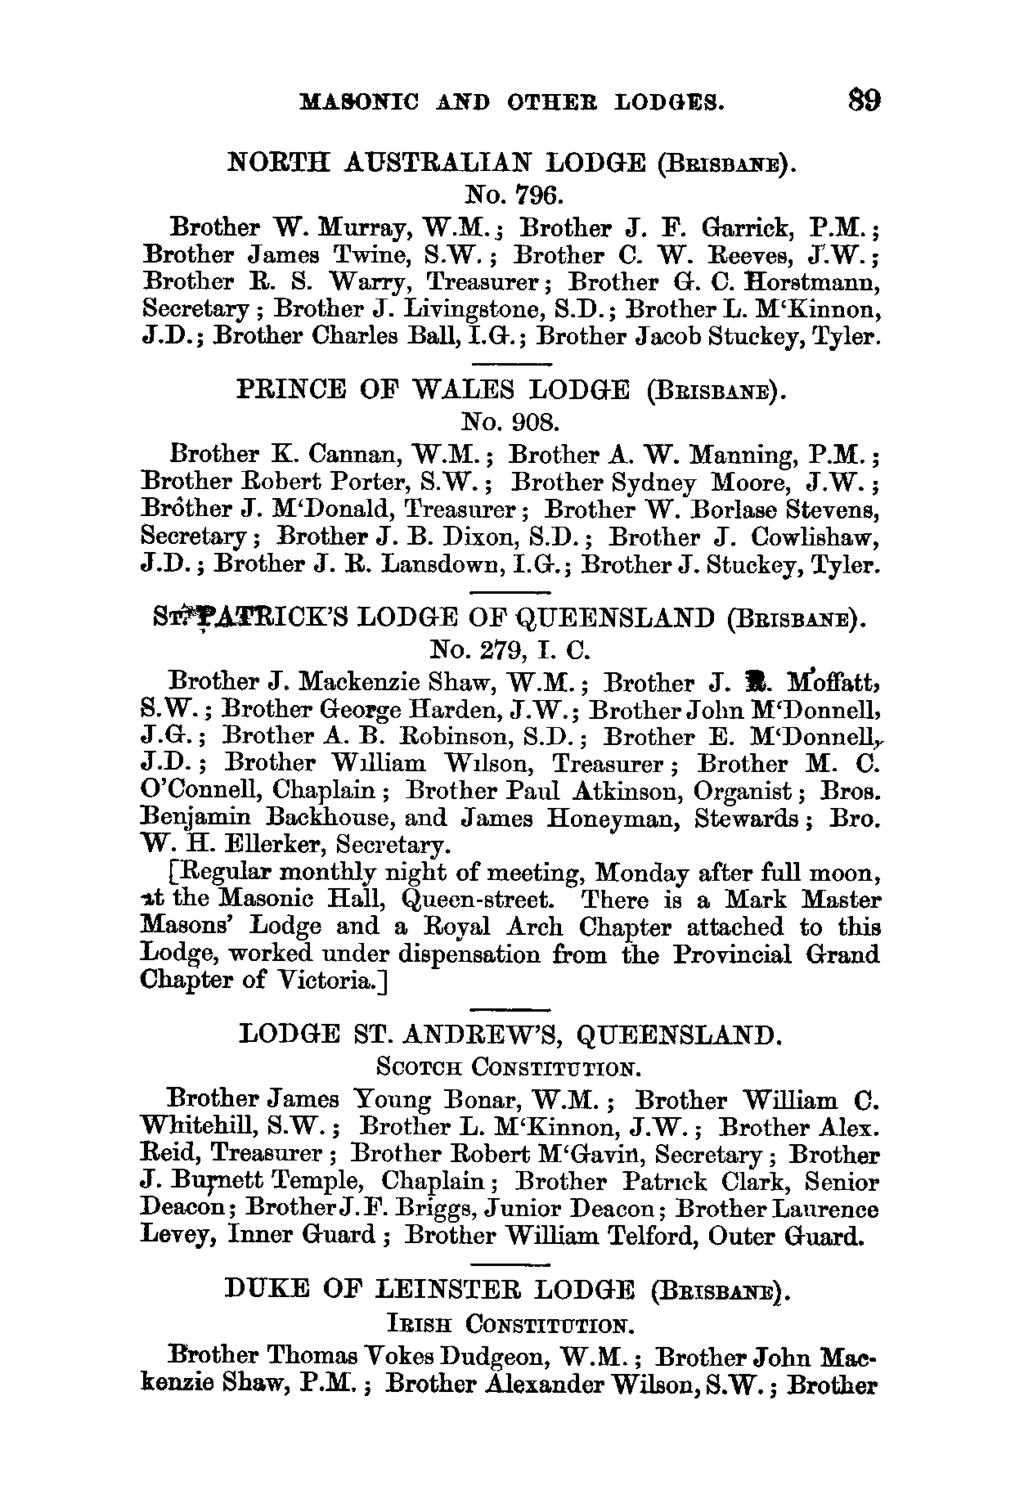 MASONIC AND OTHER LODGES. 89 NORTH AUSTRALIAN LODGE (BRISBANE). No. 796. Brother W. Murray, W.M.; Brother J. F. Garrick, P.M.; Brother James Twine, S.W.; Brother C. W. Reeves, J.W. ; Brother R. S. Warry, Treasurer ; Brother G.